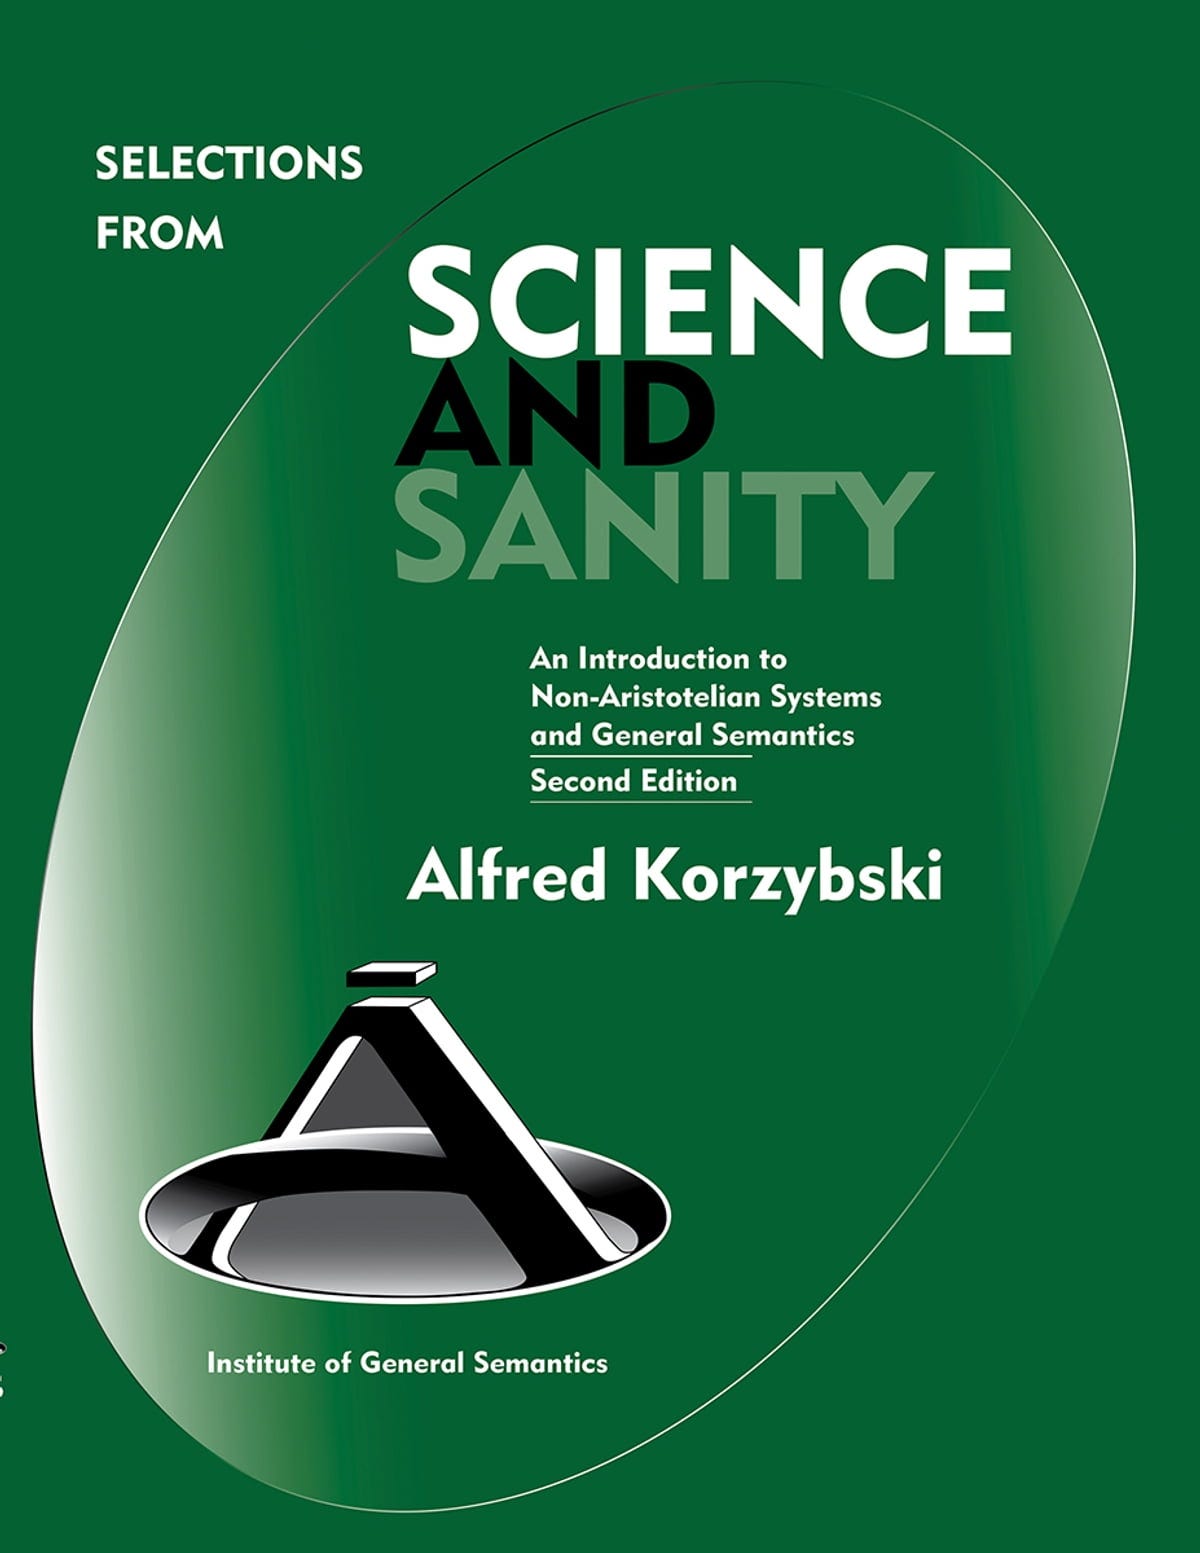 “Science and Sanity: An Introduction to Non-Aristotelian Systems and General Semantics” is a groundbreaking work that explores the limitations of 